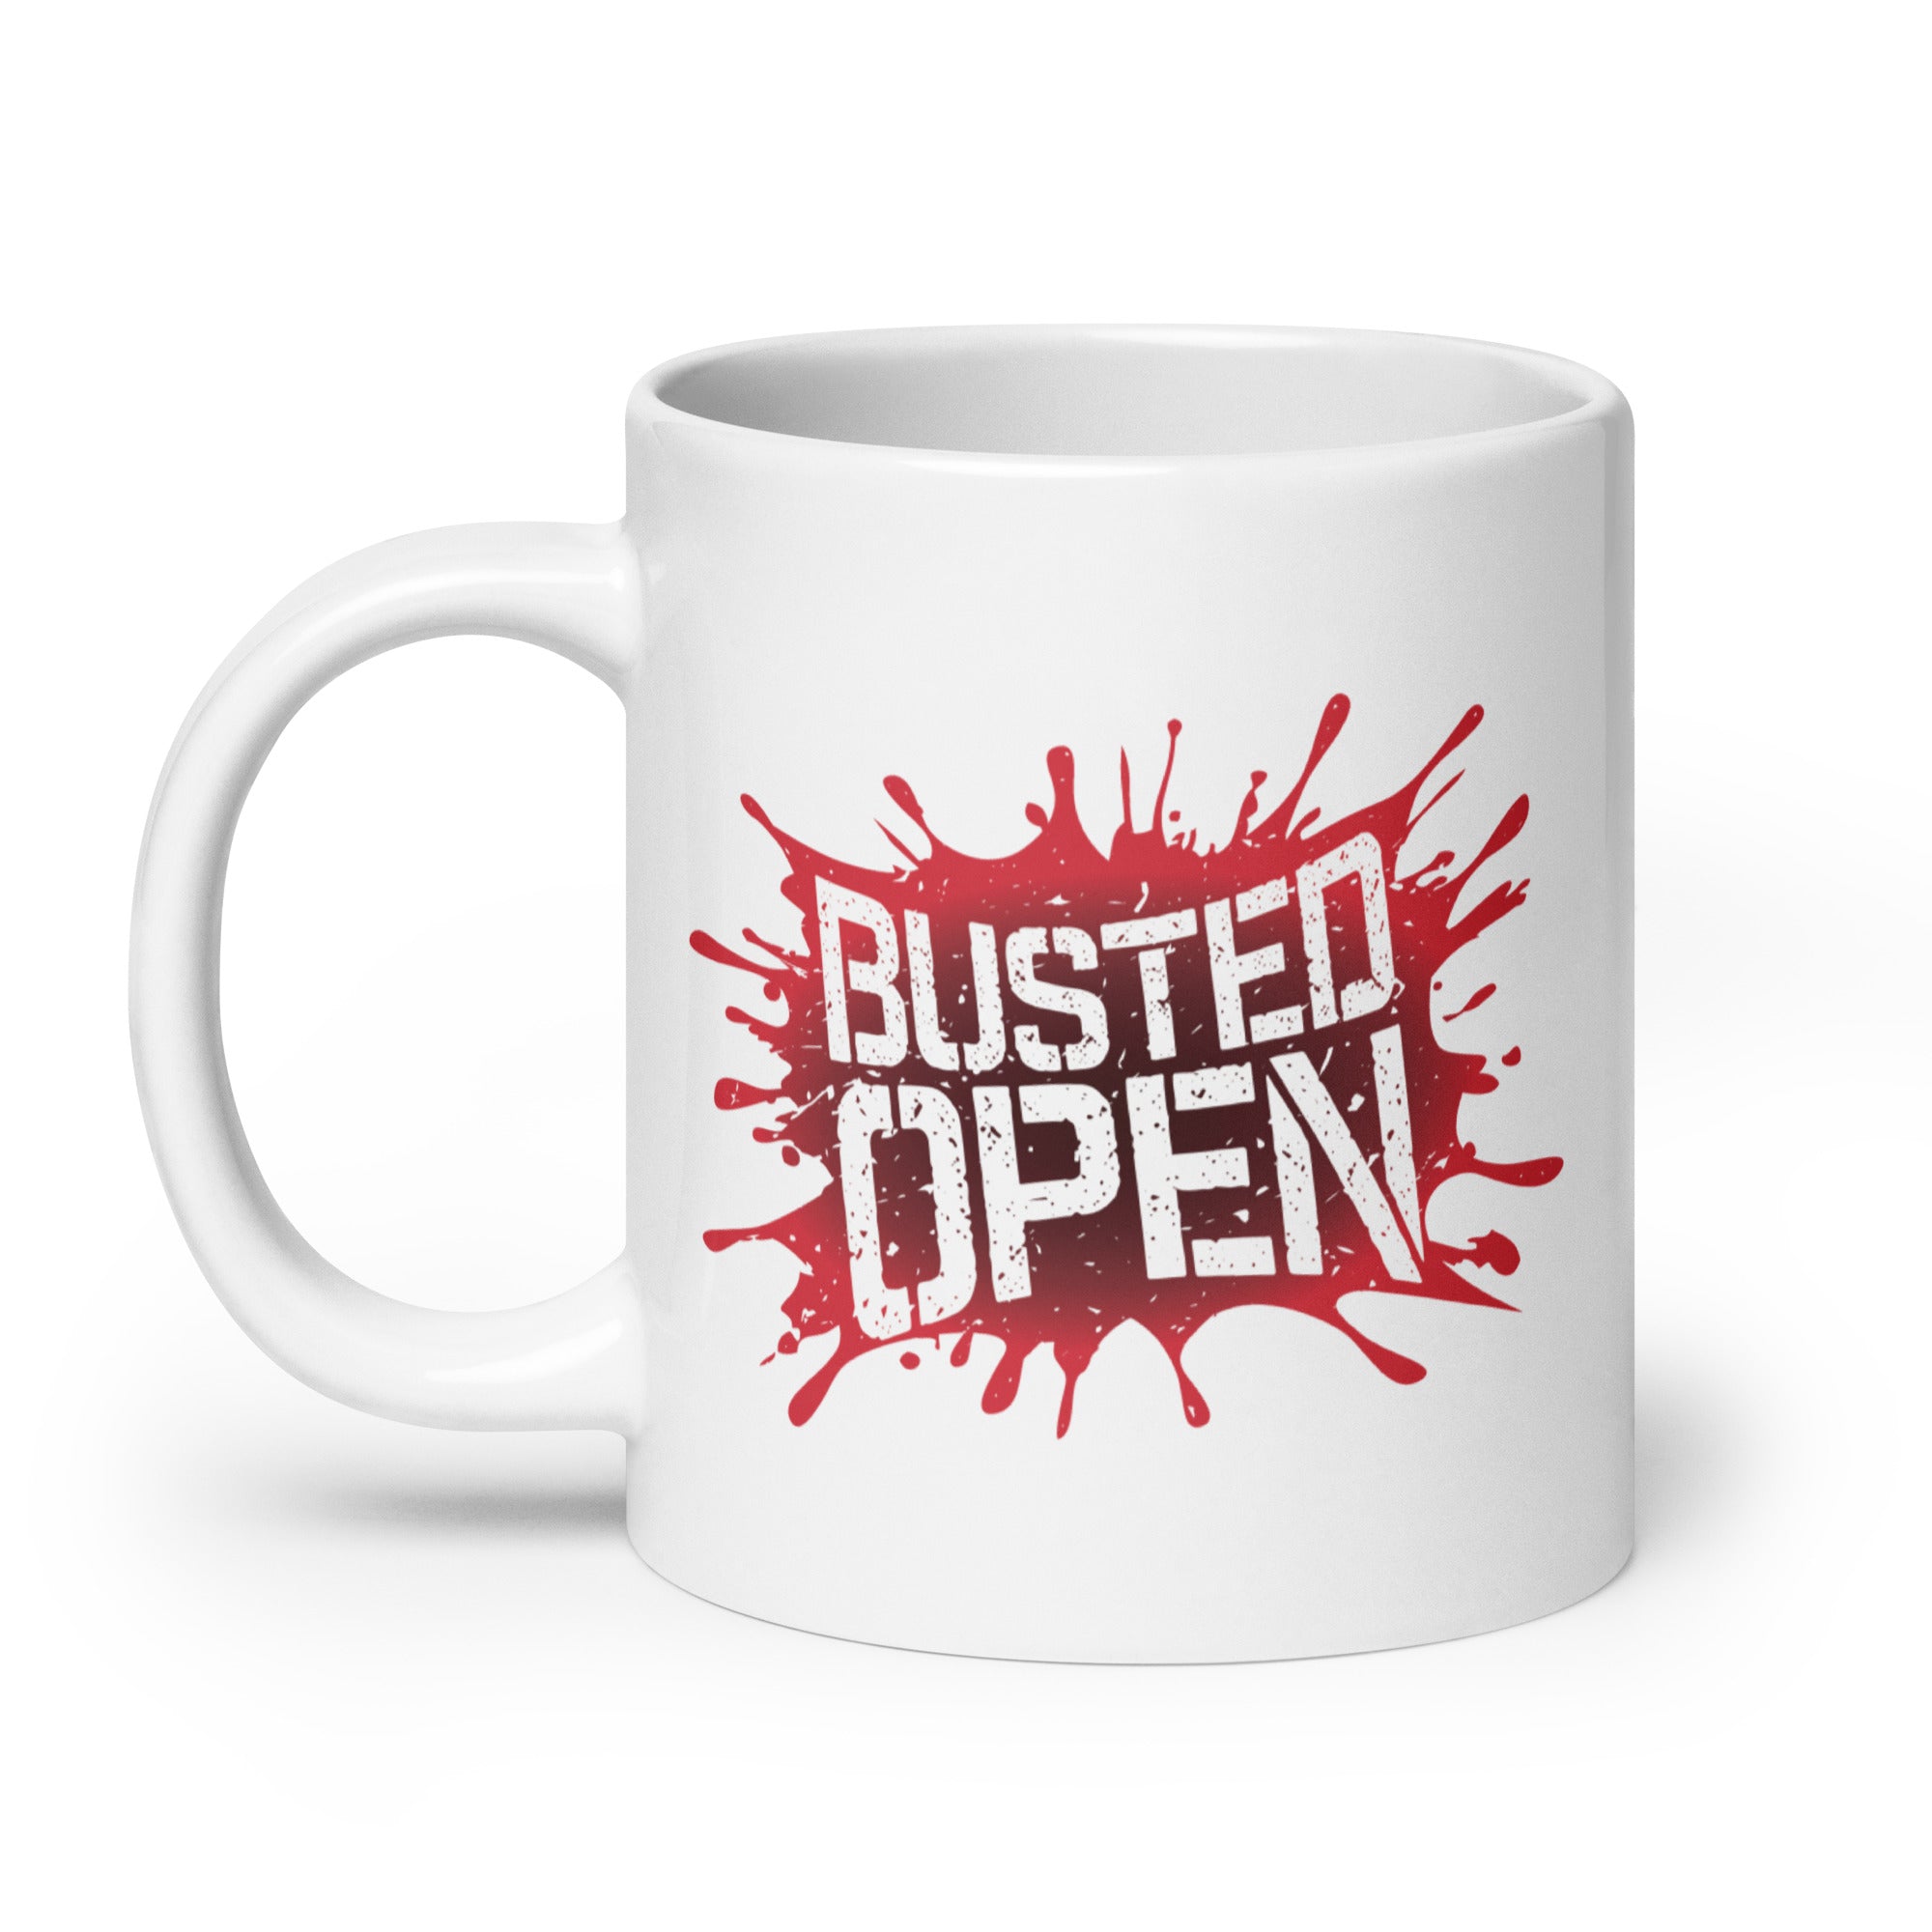 Busted Open: Bloody Good Mug